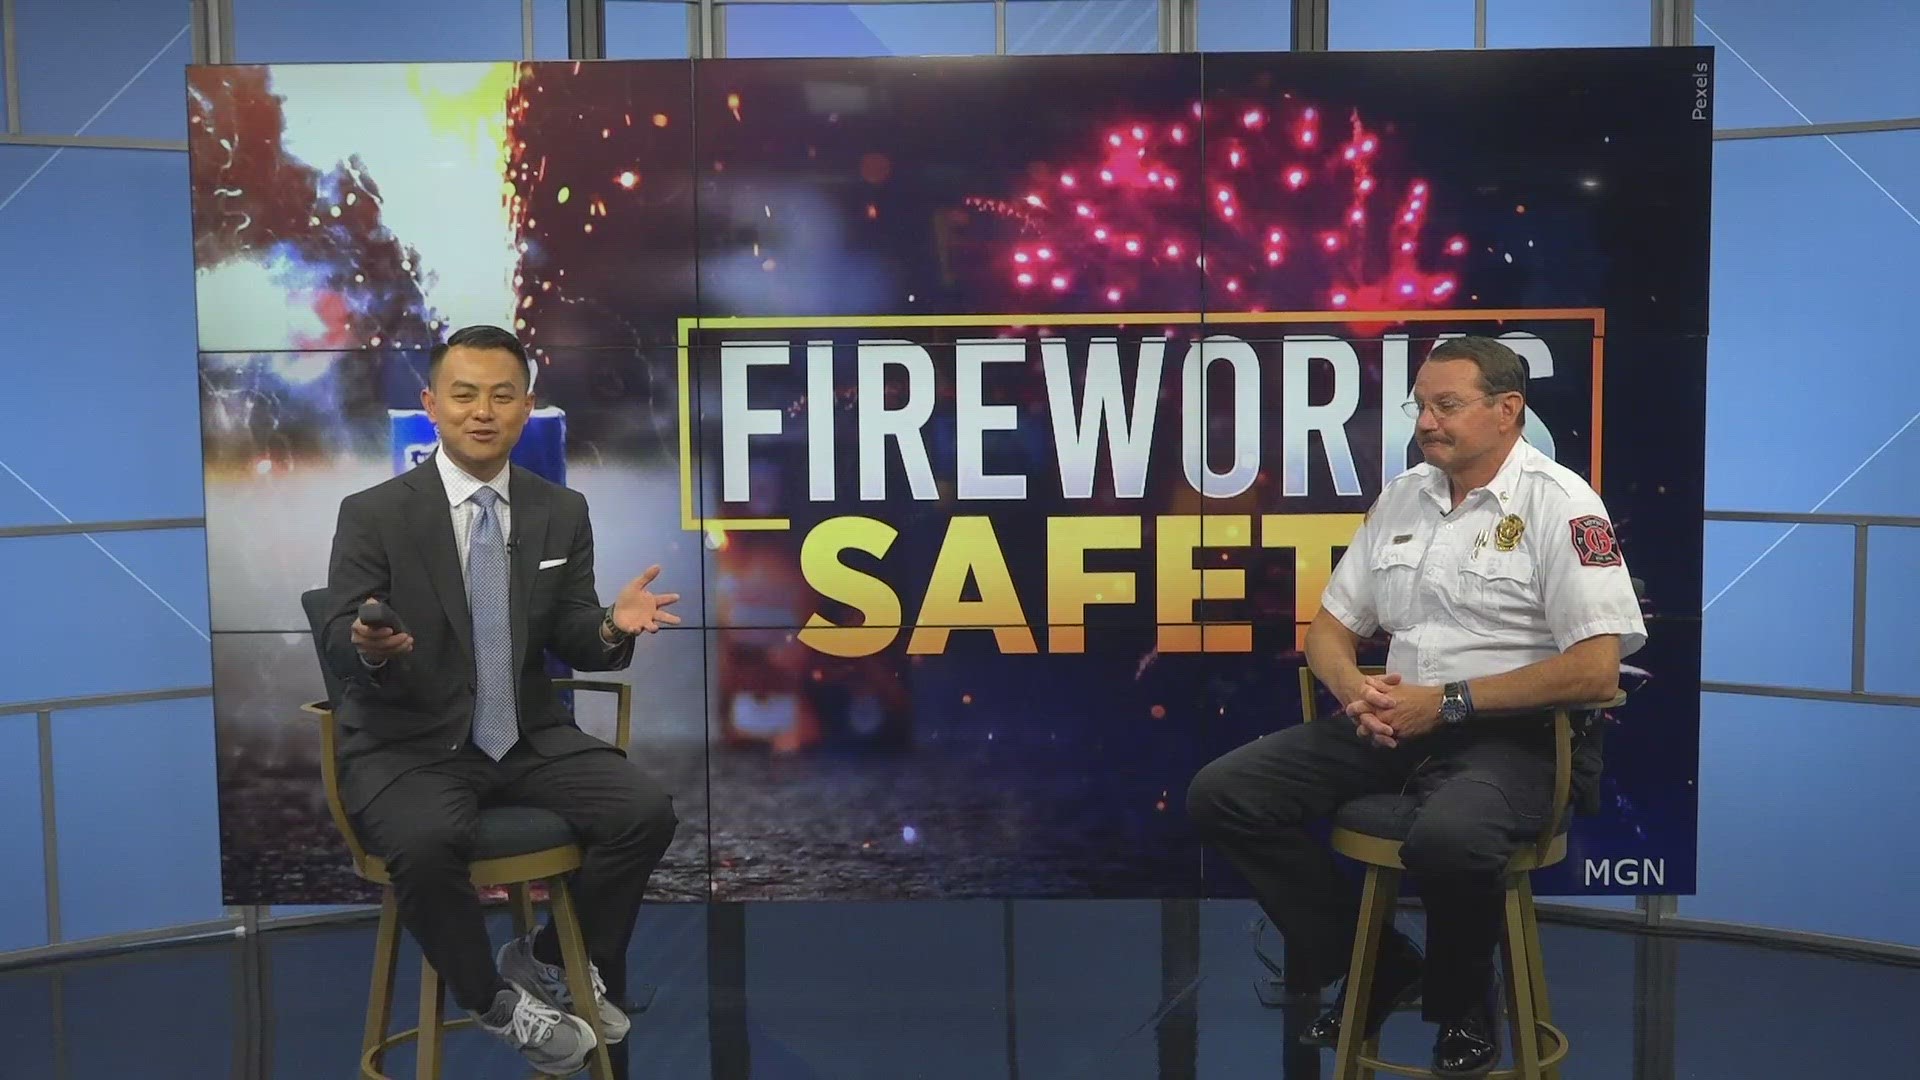 Jim Clark serves as fire chief for Johnston and Grimes, but the two cities have different rules surrounding fireworks.